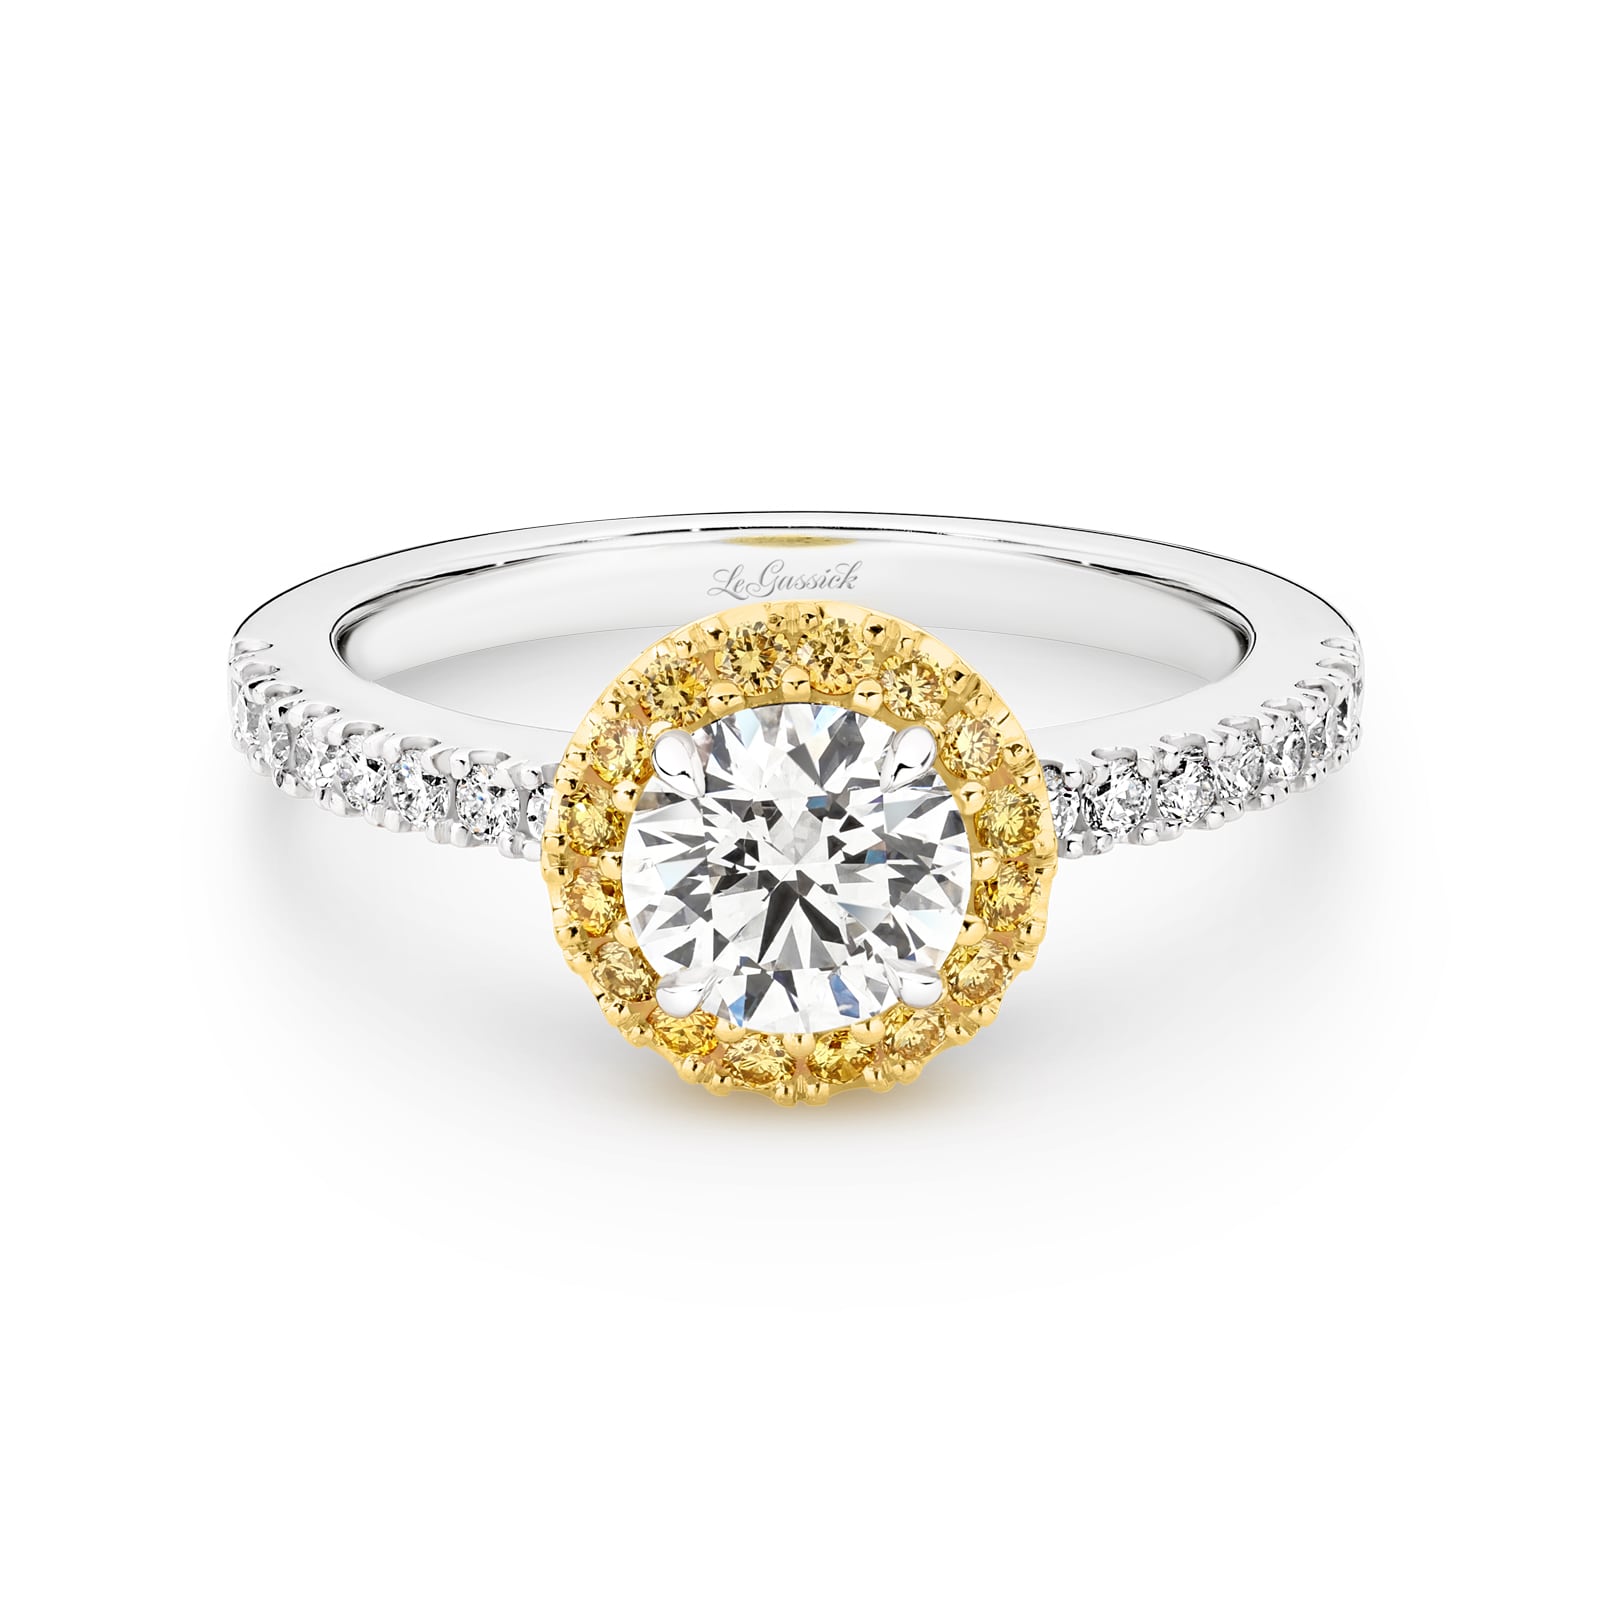 Lucy is a stunning 1 carat white diamond ring with a yellow diamond halo. Part of the Beyond Luxury Collection from LeGassick.